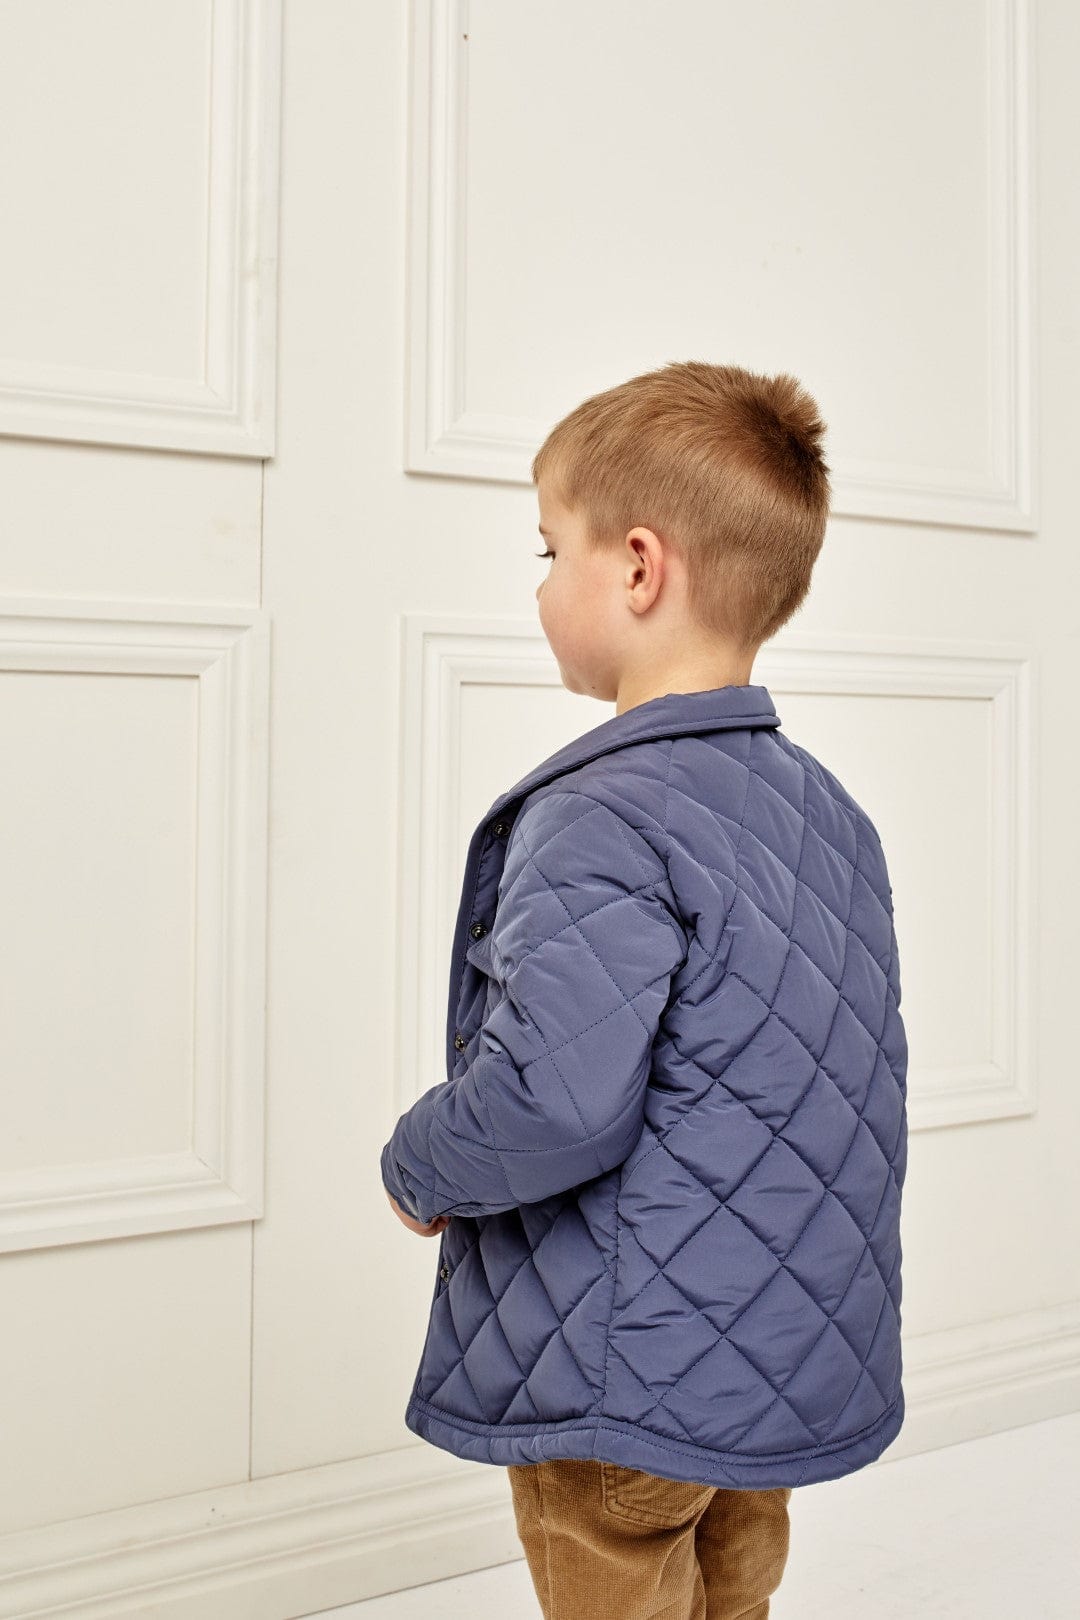 Milky Boys Jacket Quilted Overshirt